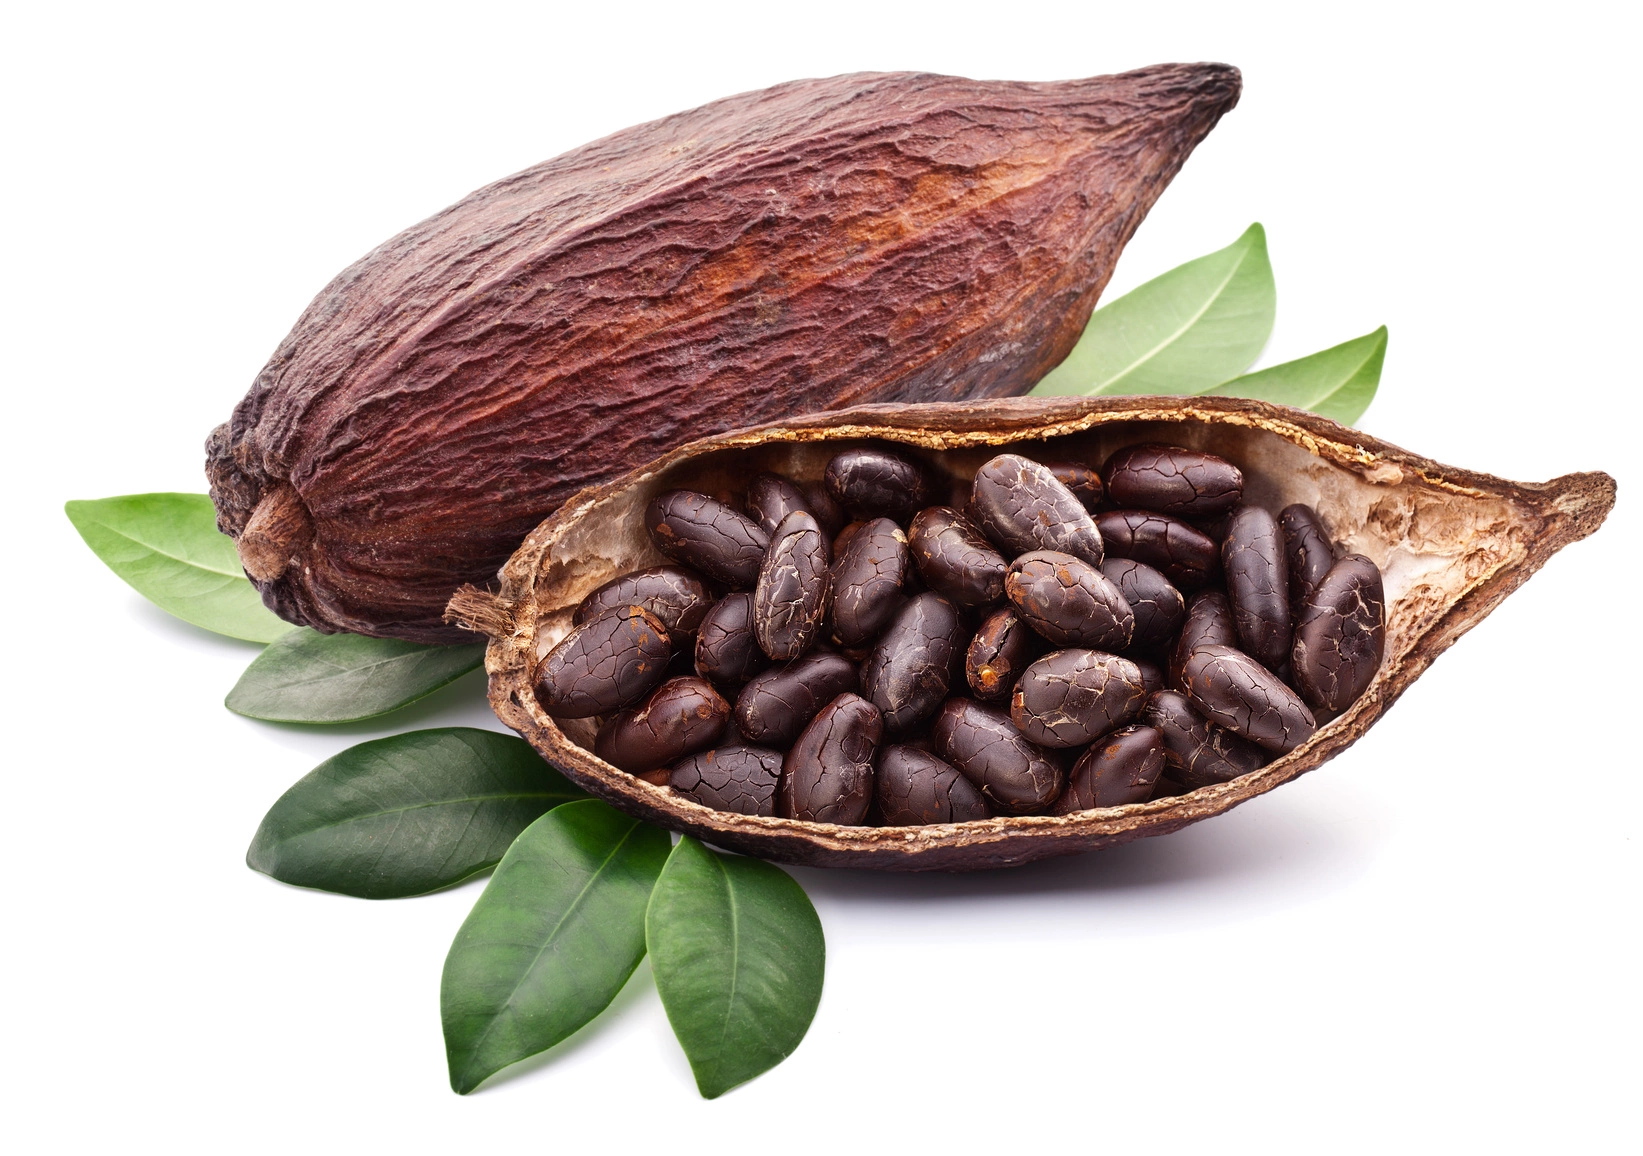 Does Cacao Have Caffeine?